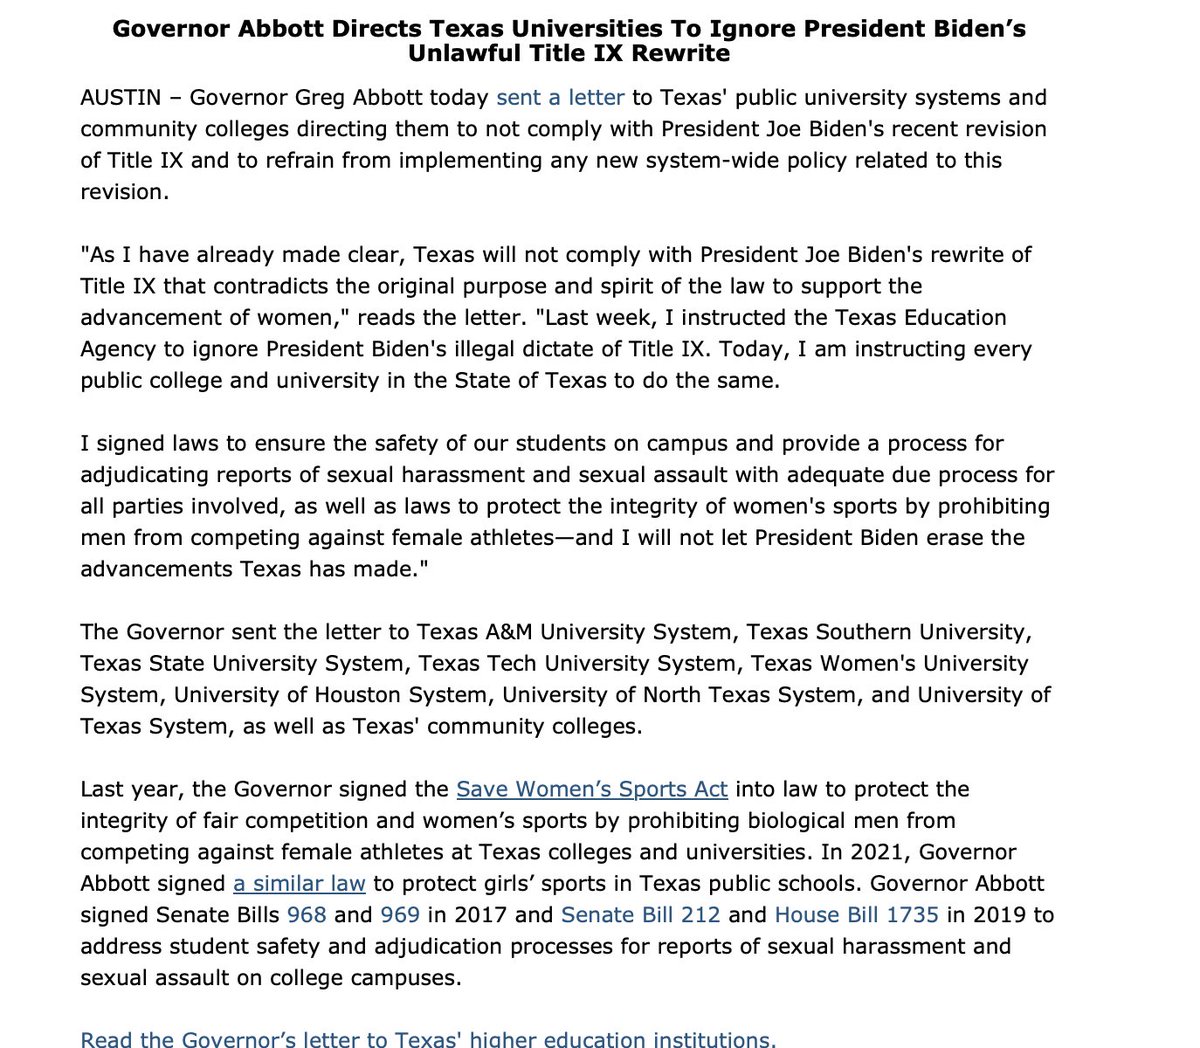 BREAKING: @GovAbbott tells Texas universities to ignore Biden's Title IX rewrite after @TexasScorecard reported on Texas A&M's rush to implement the controversial new rules